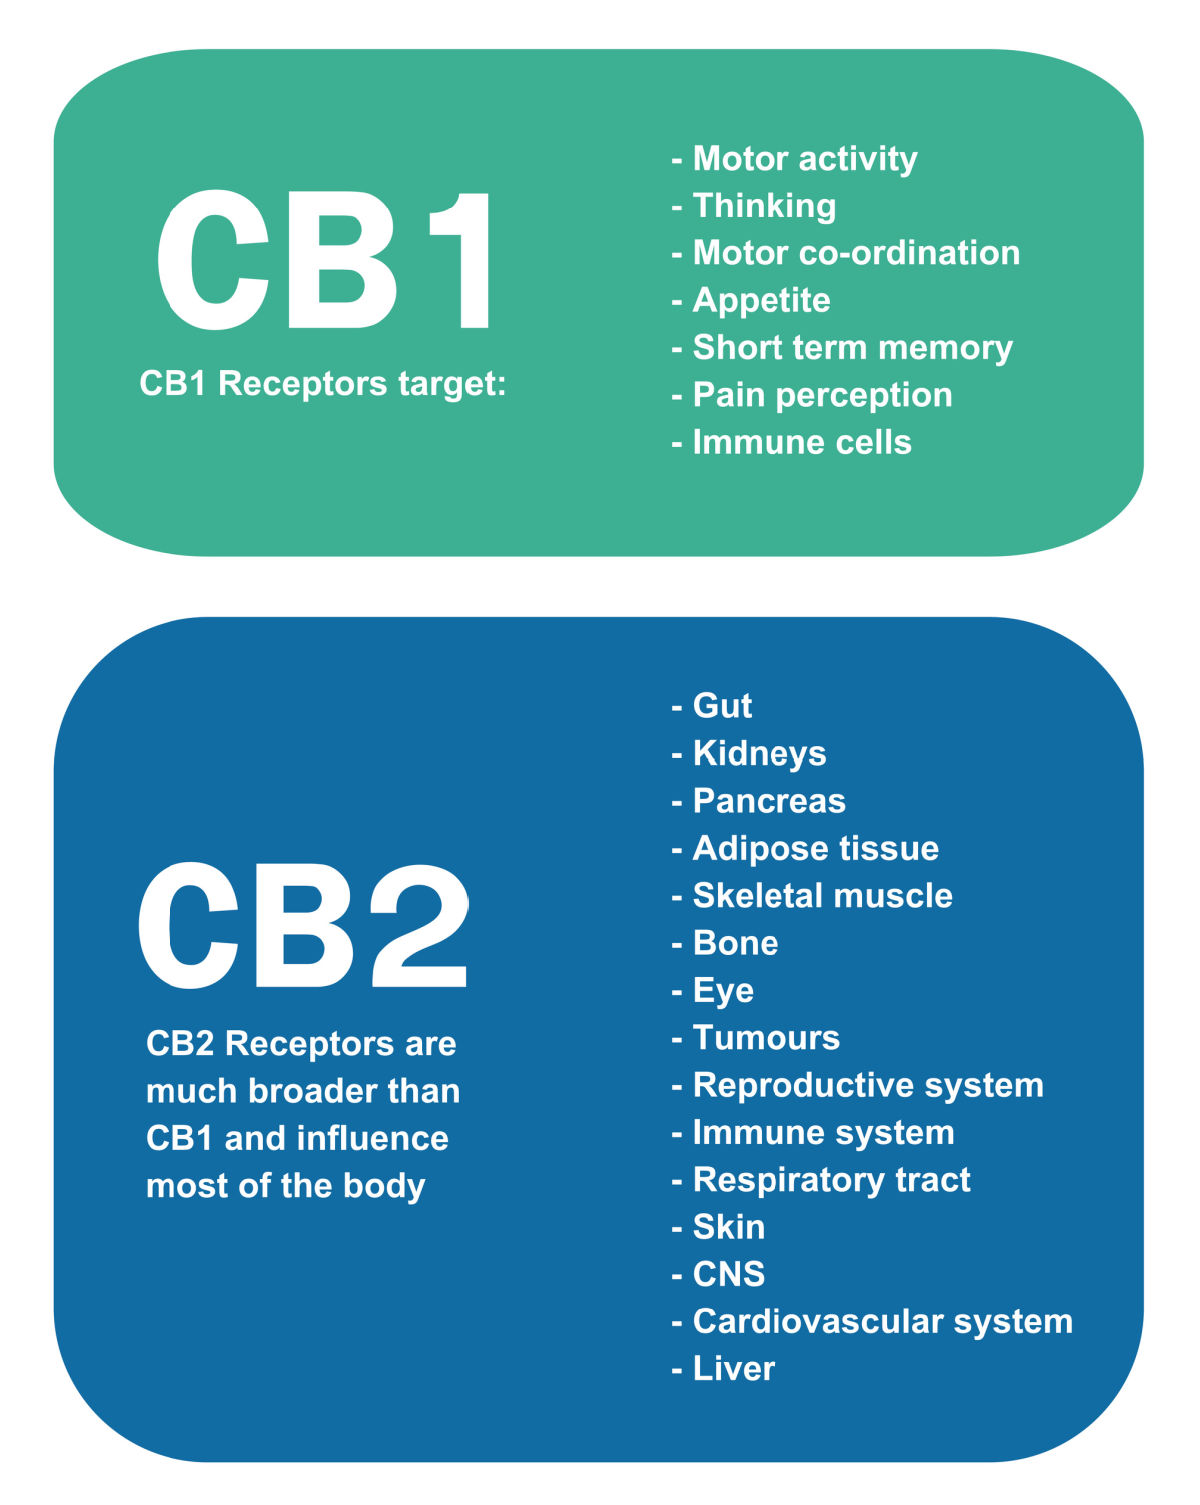 A graphic showing where the CB1 and CB2 receptors are located